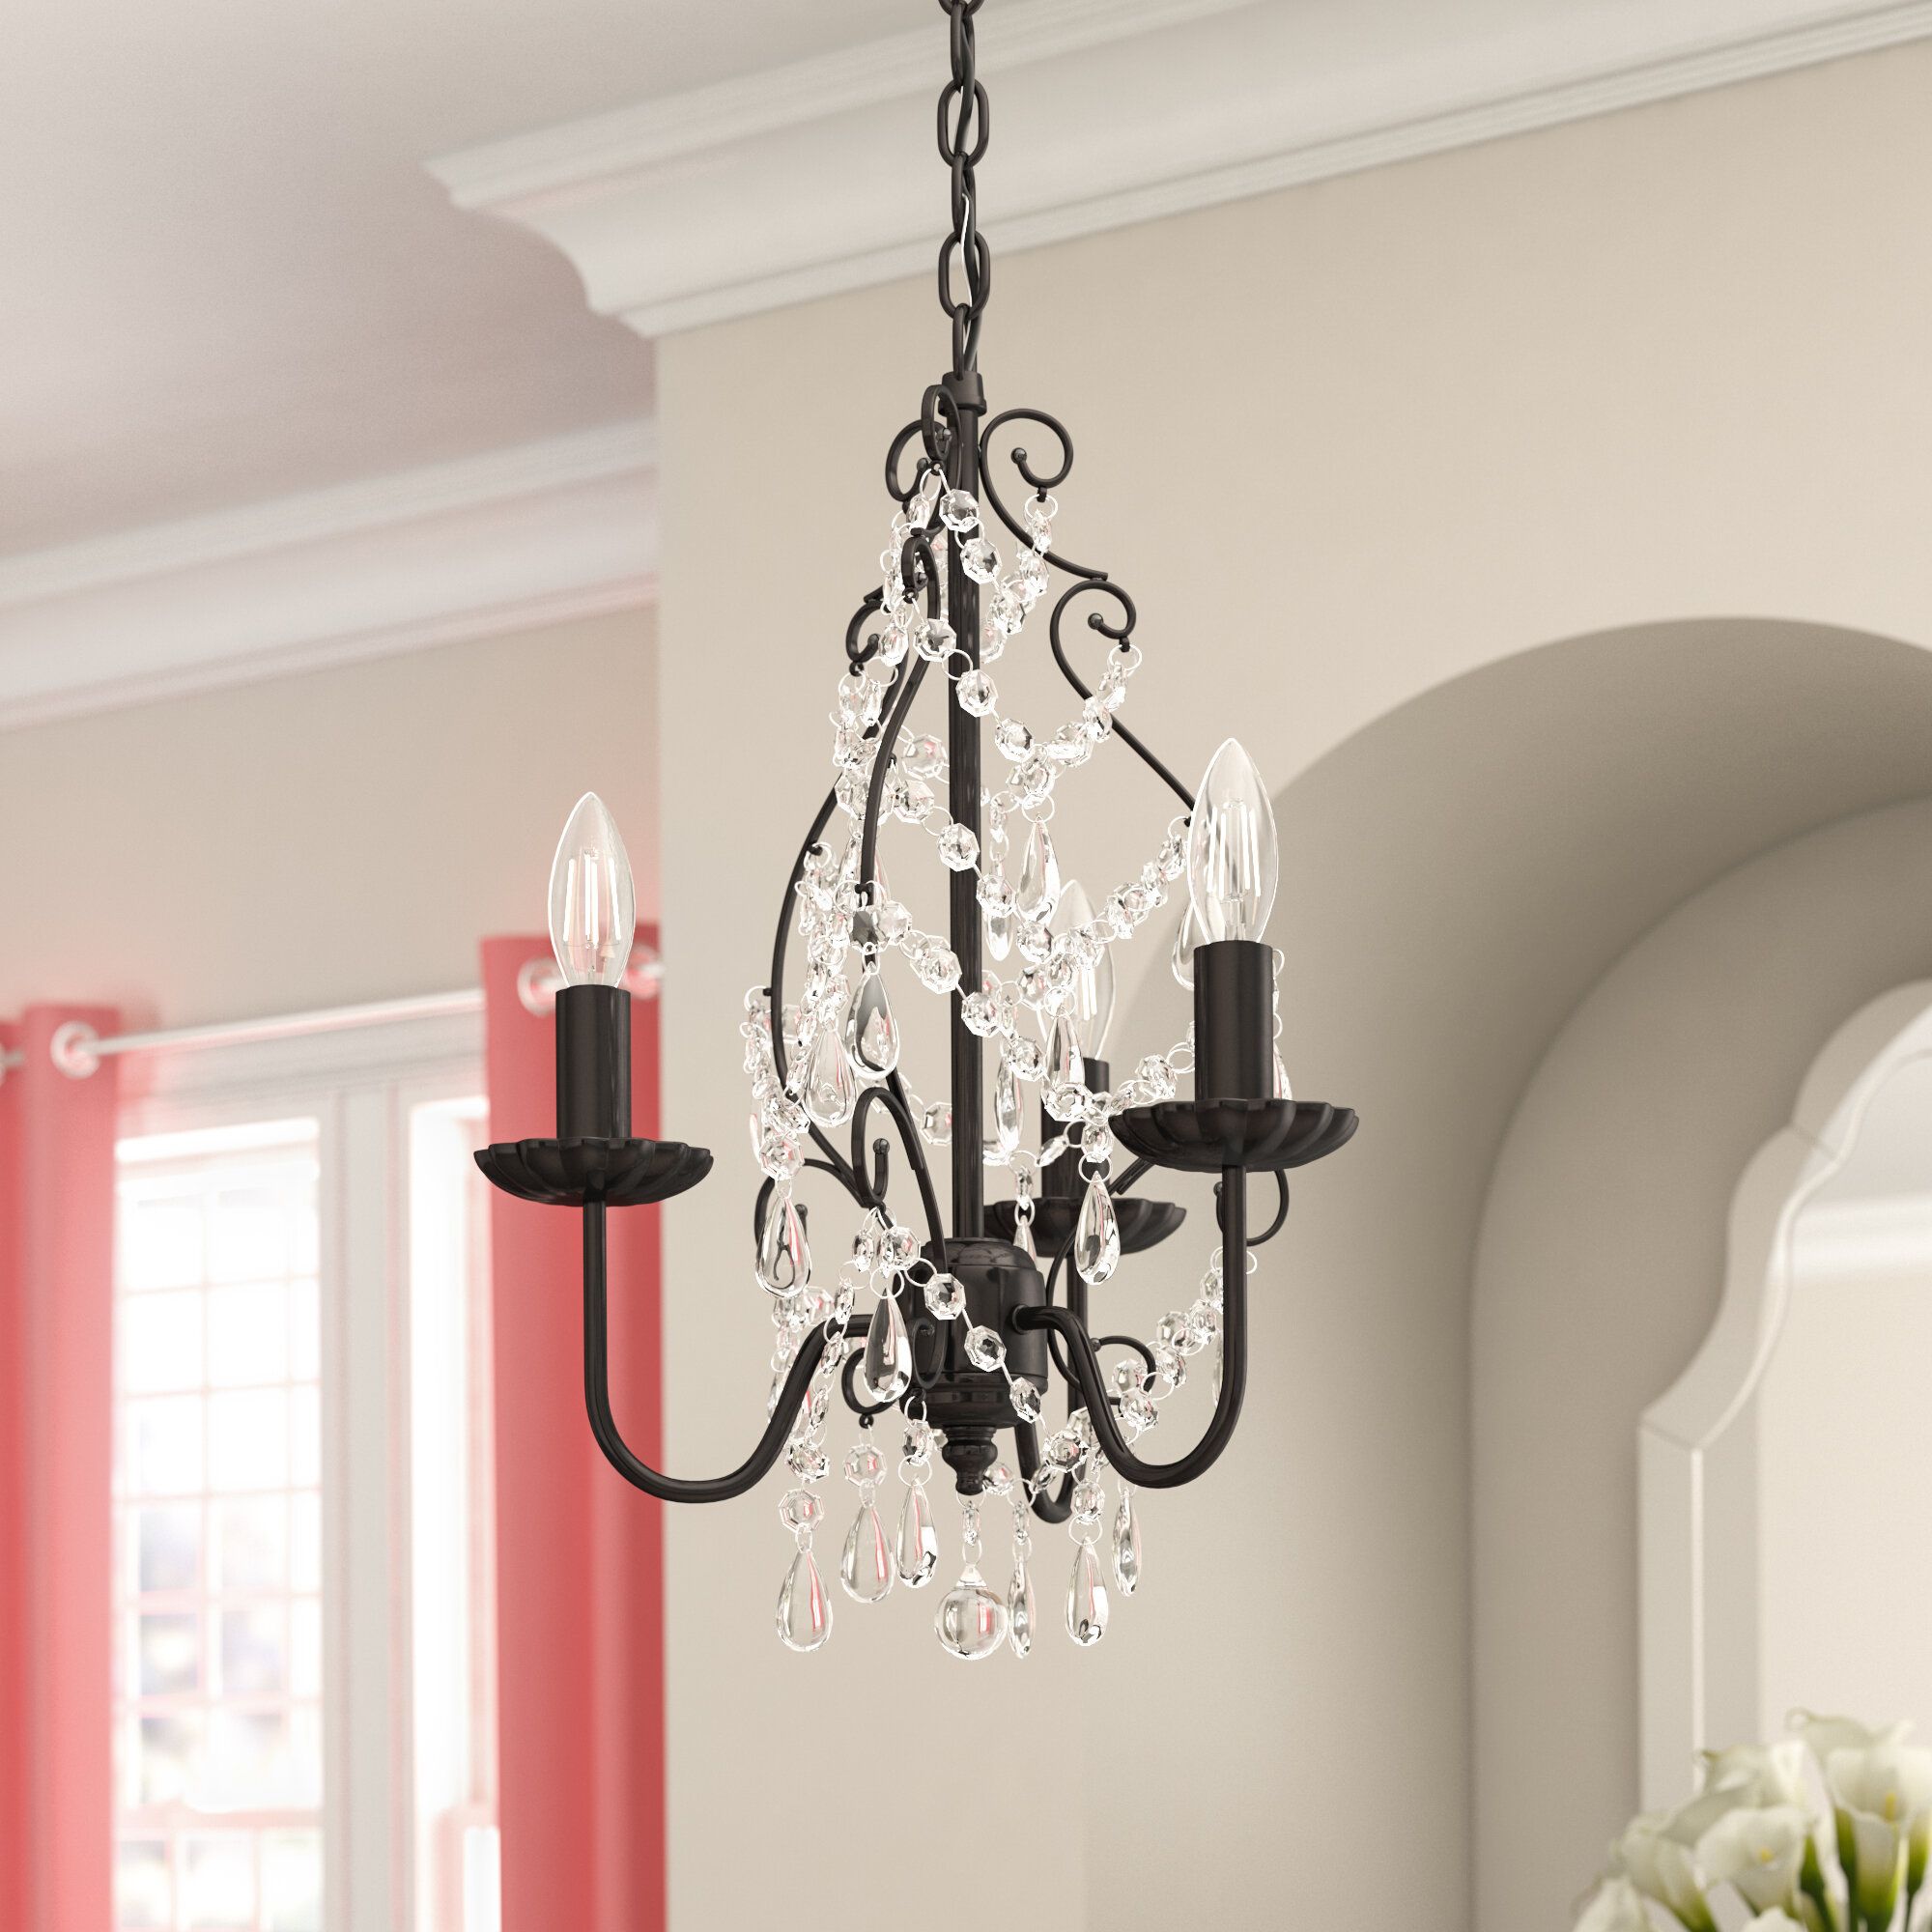 Archway 3 Light Candle Style Chandelier Pertaining To Aldora 4 Light Candle Style Chandeliers (View 24 of 30)